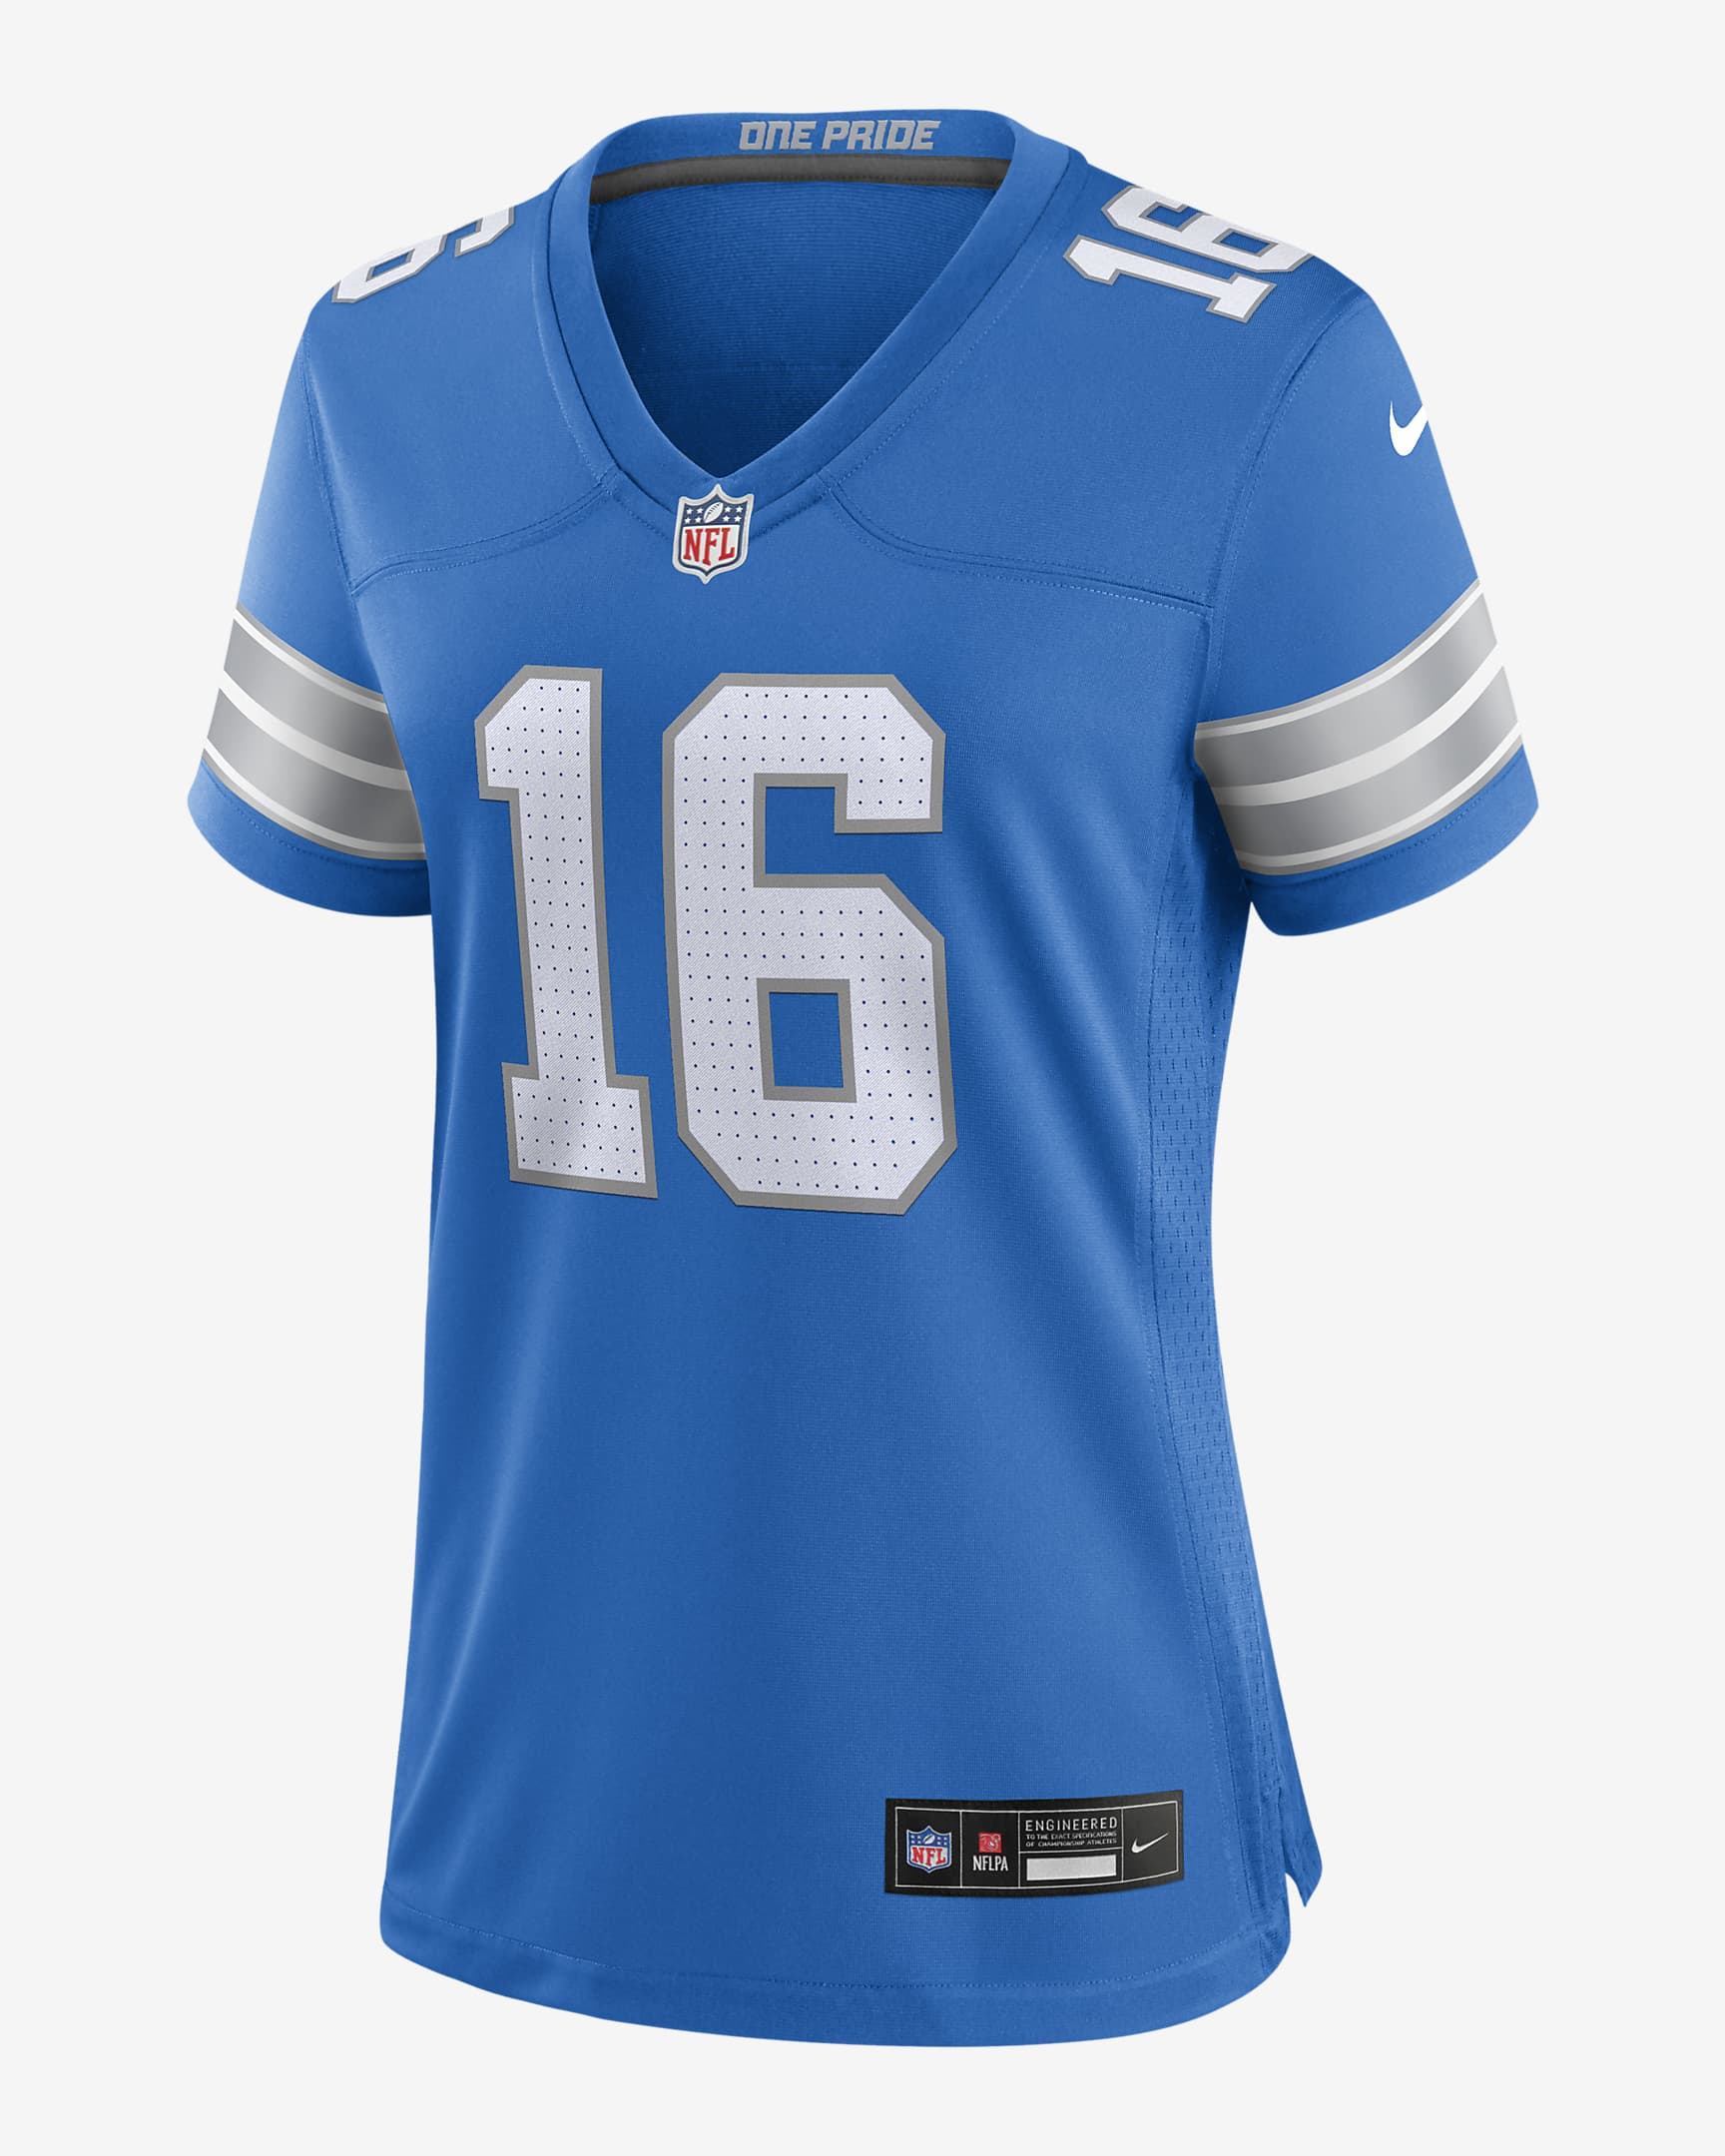 Jared Goff Detroit Lions Women's Nike NFL Game Football Jersey. Nike.com